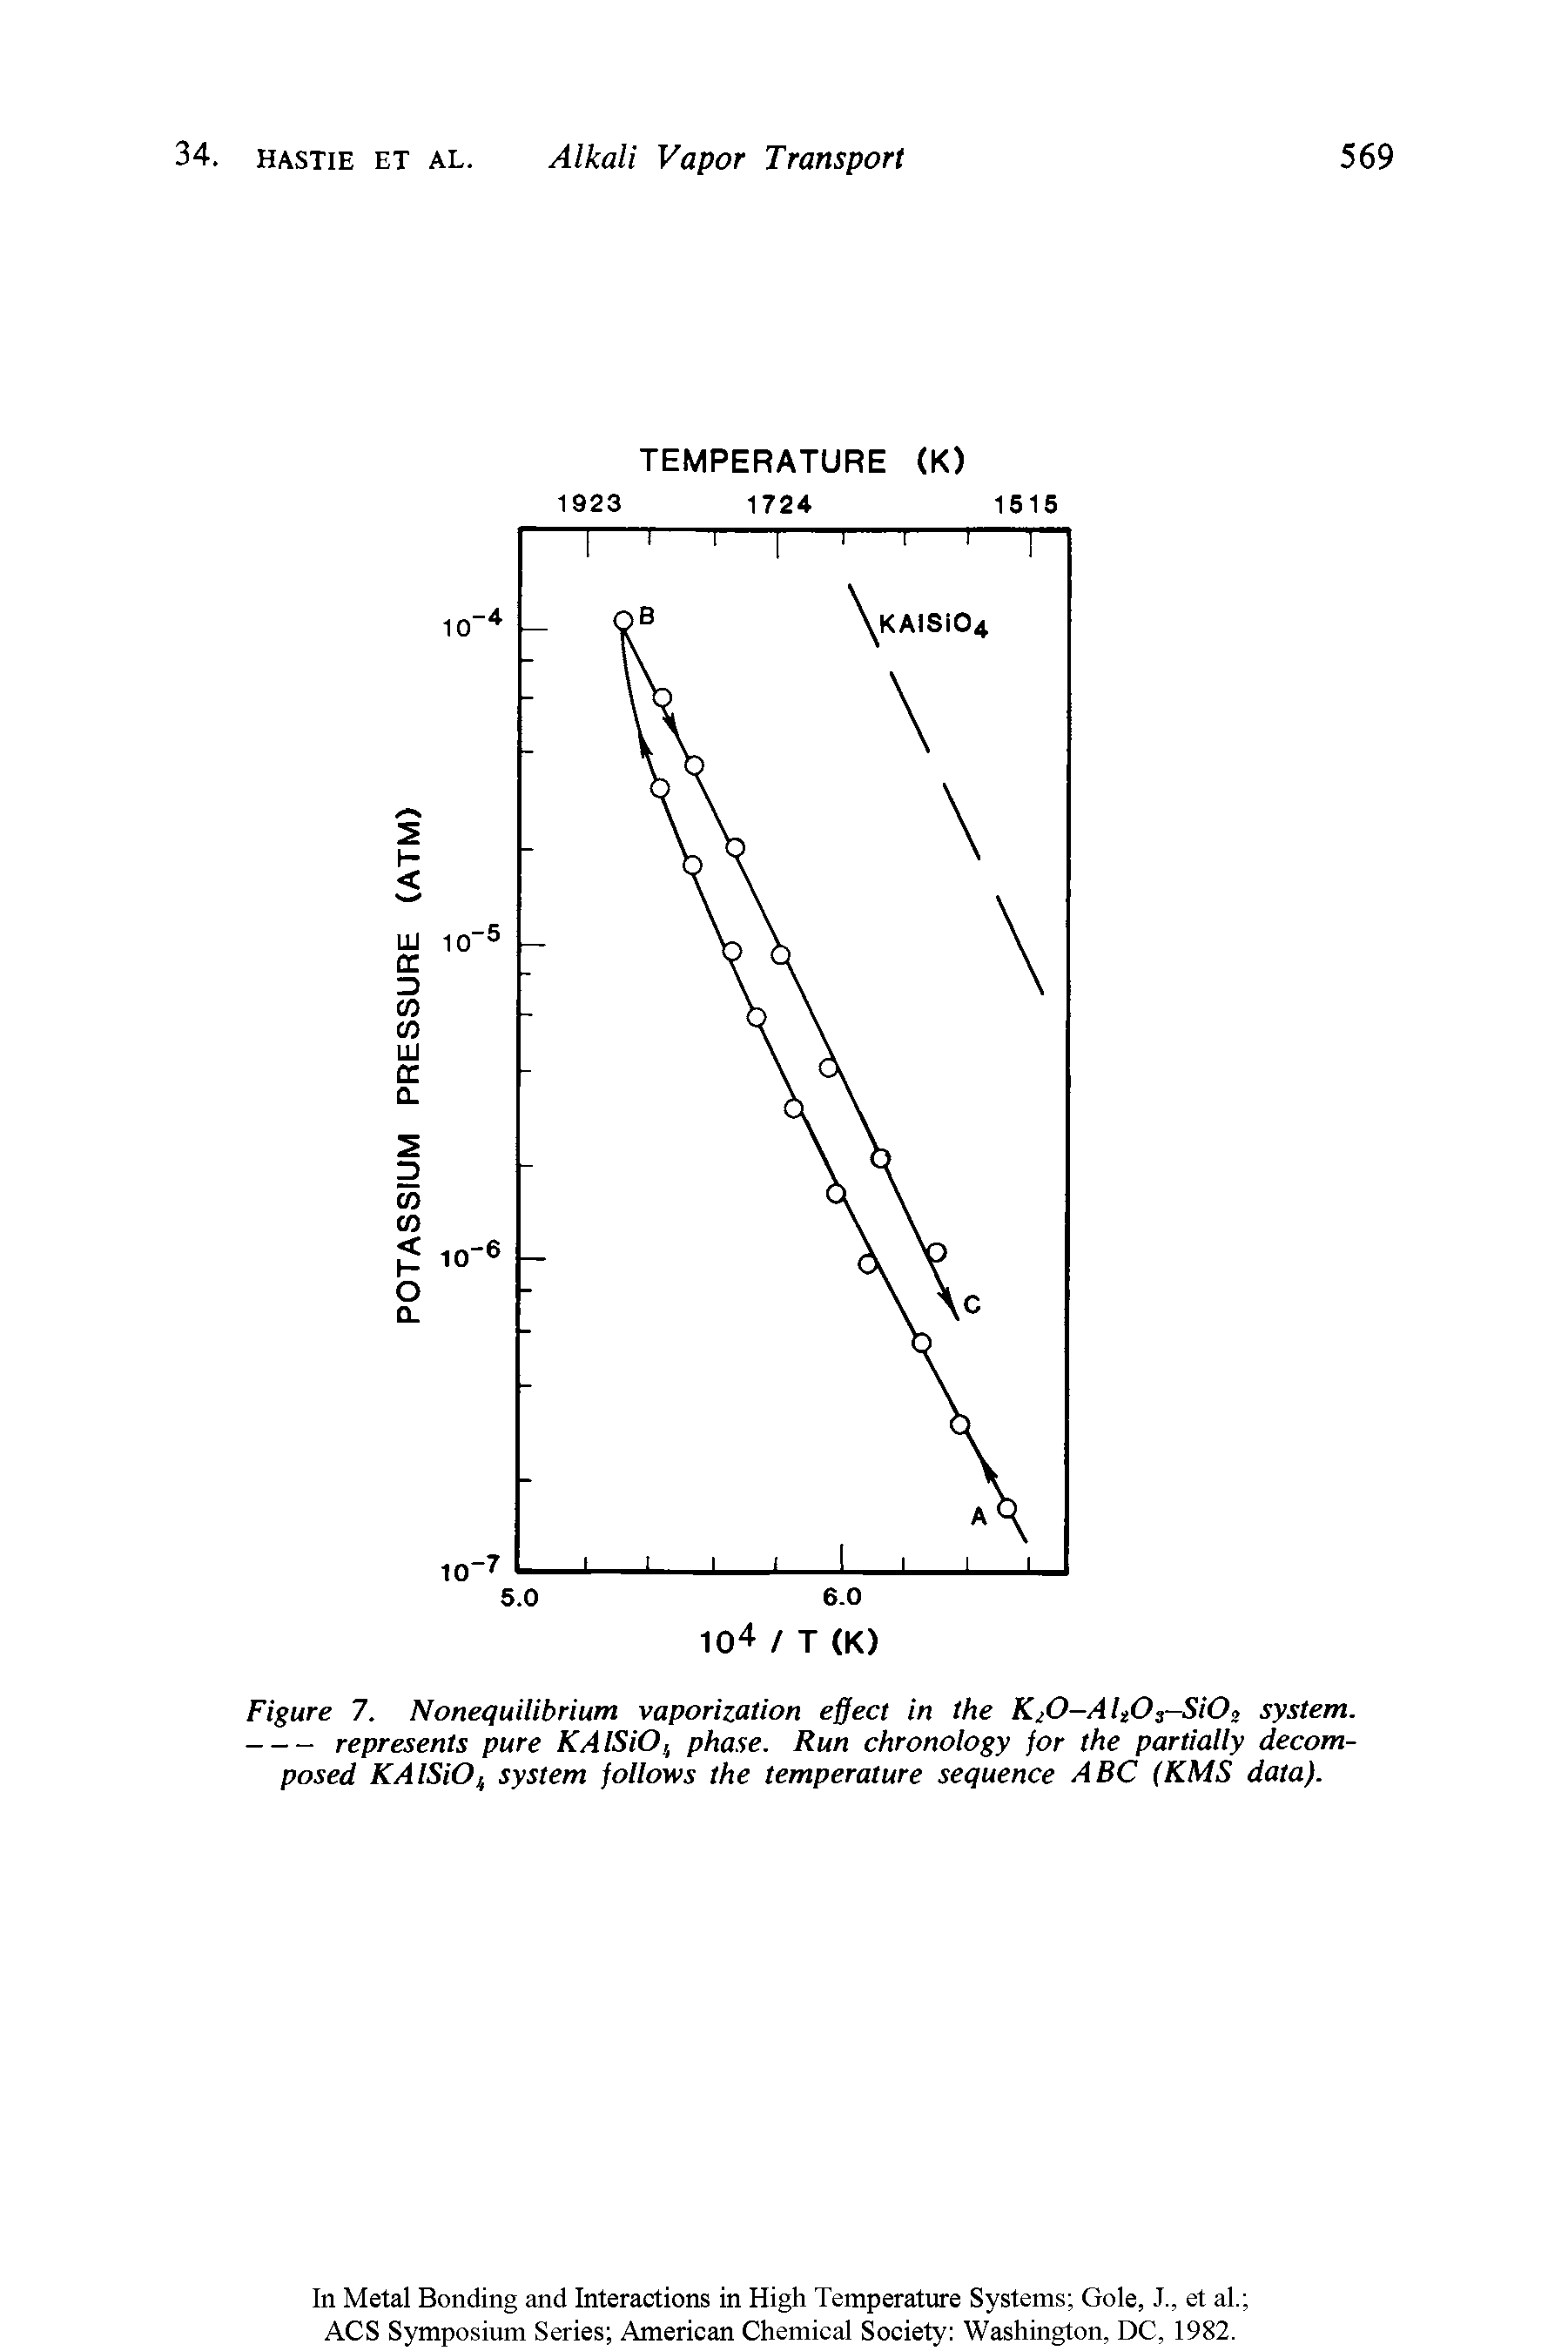 Figure 7. Nonequilibrium vaporization effect in the K O-AltOs-SiO system. -----represents pure KAlSiO phase. Run chronology for the partially decomposed KAlSiOf system follows the temperature sequence ABC (KMS data).